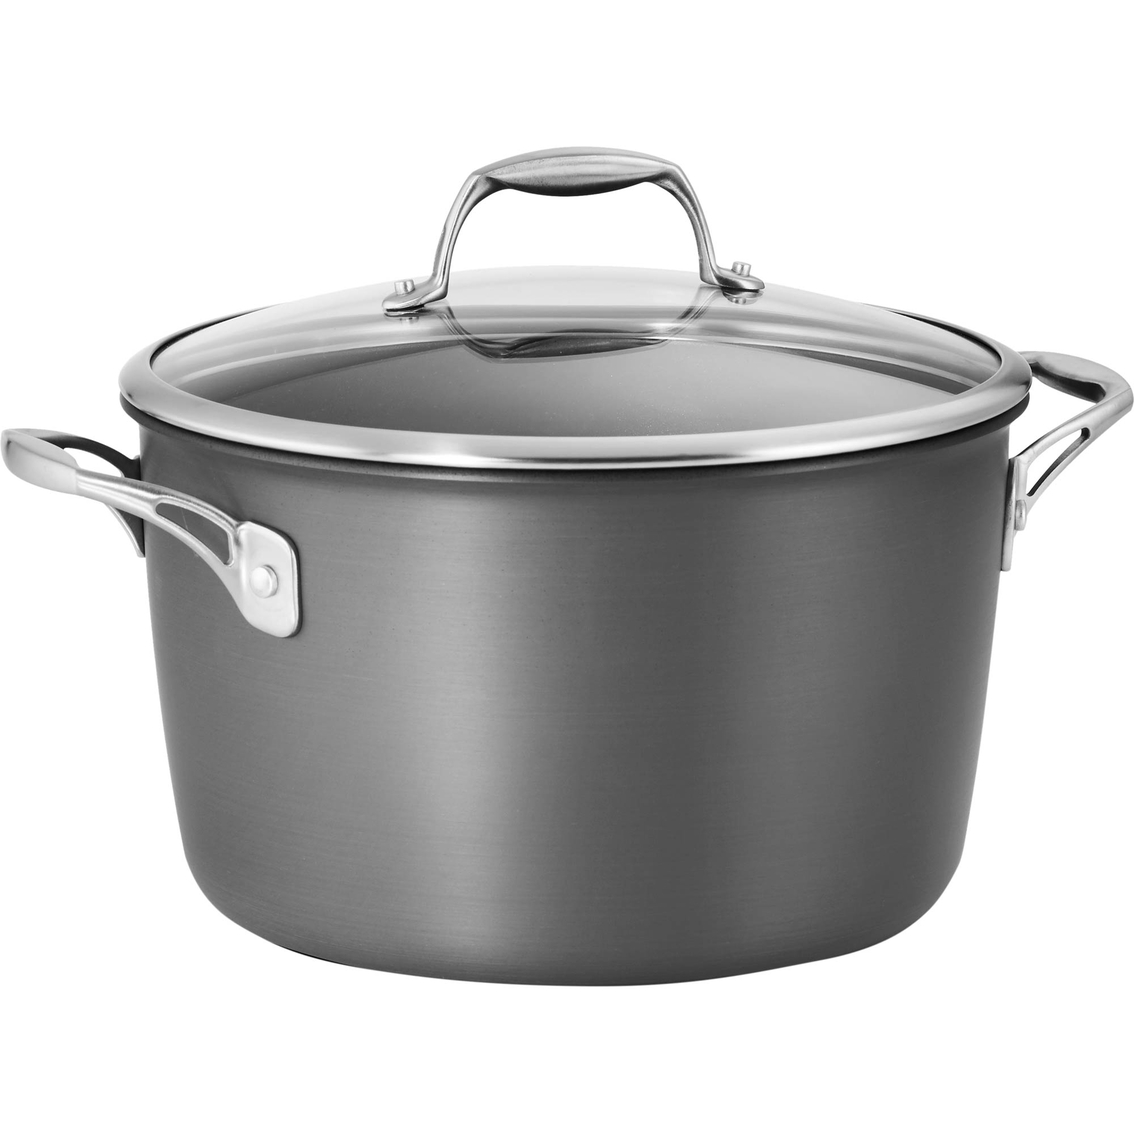 Tramontina Covered Stock Pot Hard Anodized 8 Qt